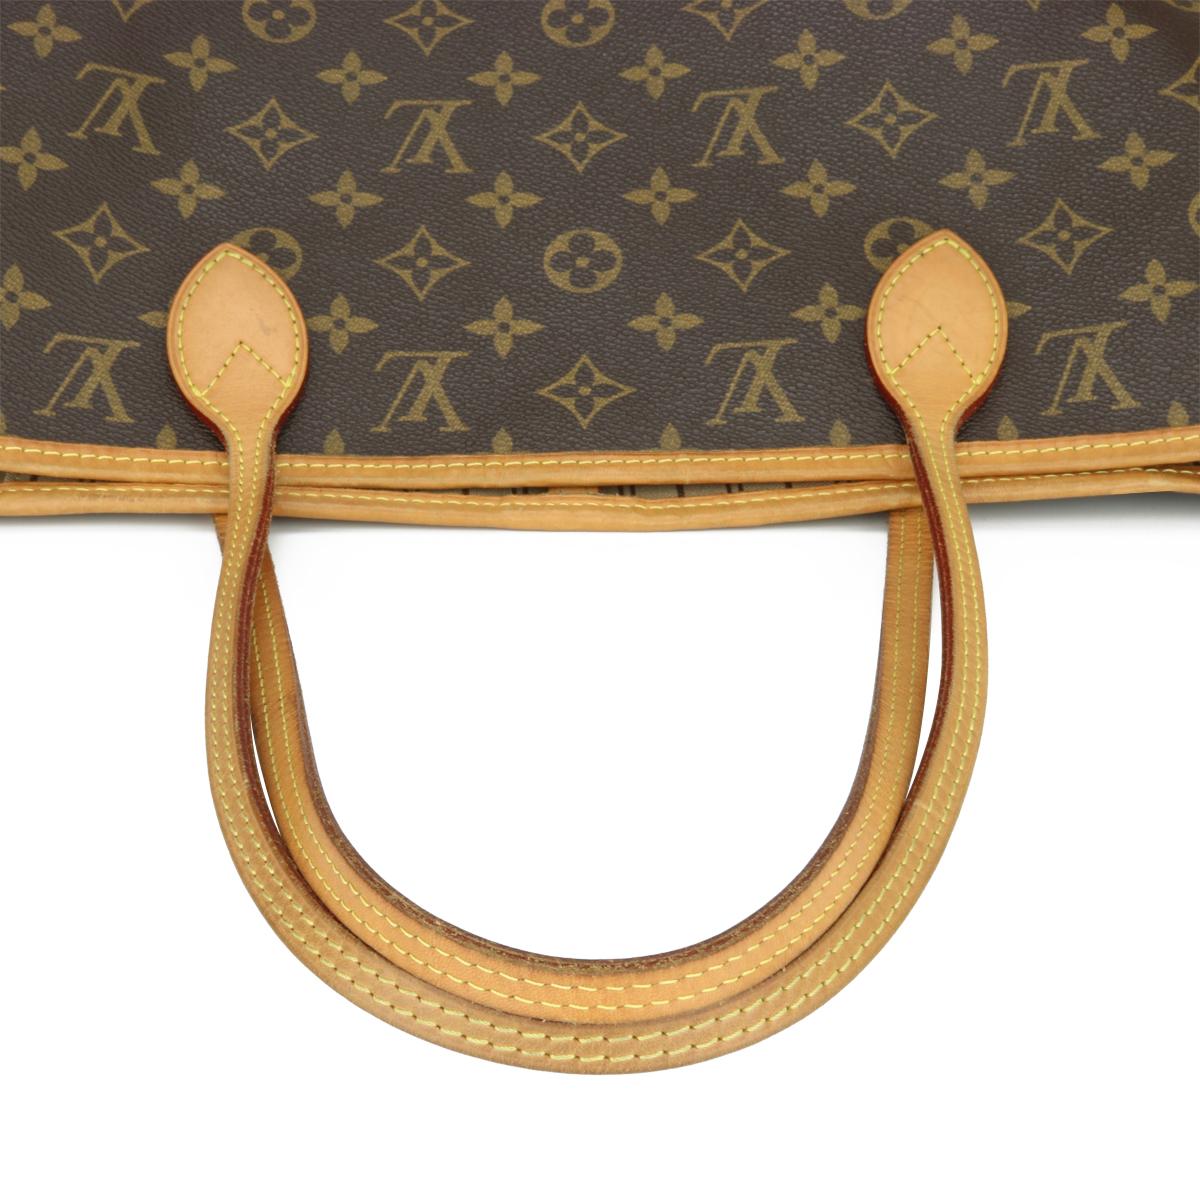 Louis Vuitton Neverfull MM Tote in Monogram with Beige Interior 2018 For Sale 6